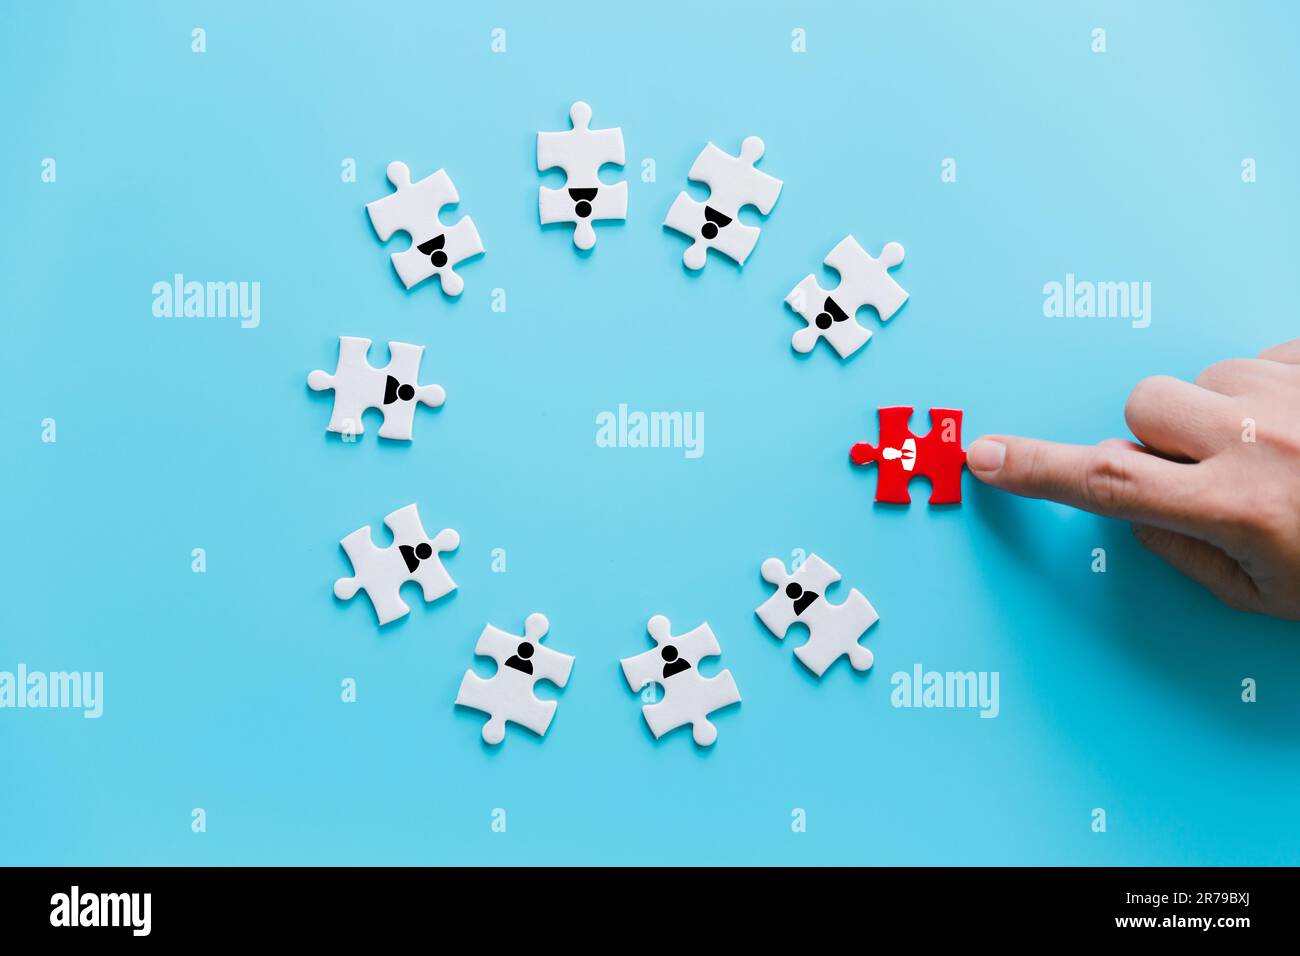 Human resources management and recruitment business build team concept. Image of tangram puzzle blocks with people icons over wooden table ,human reso Stock Photo